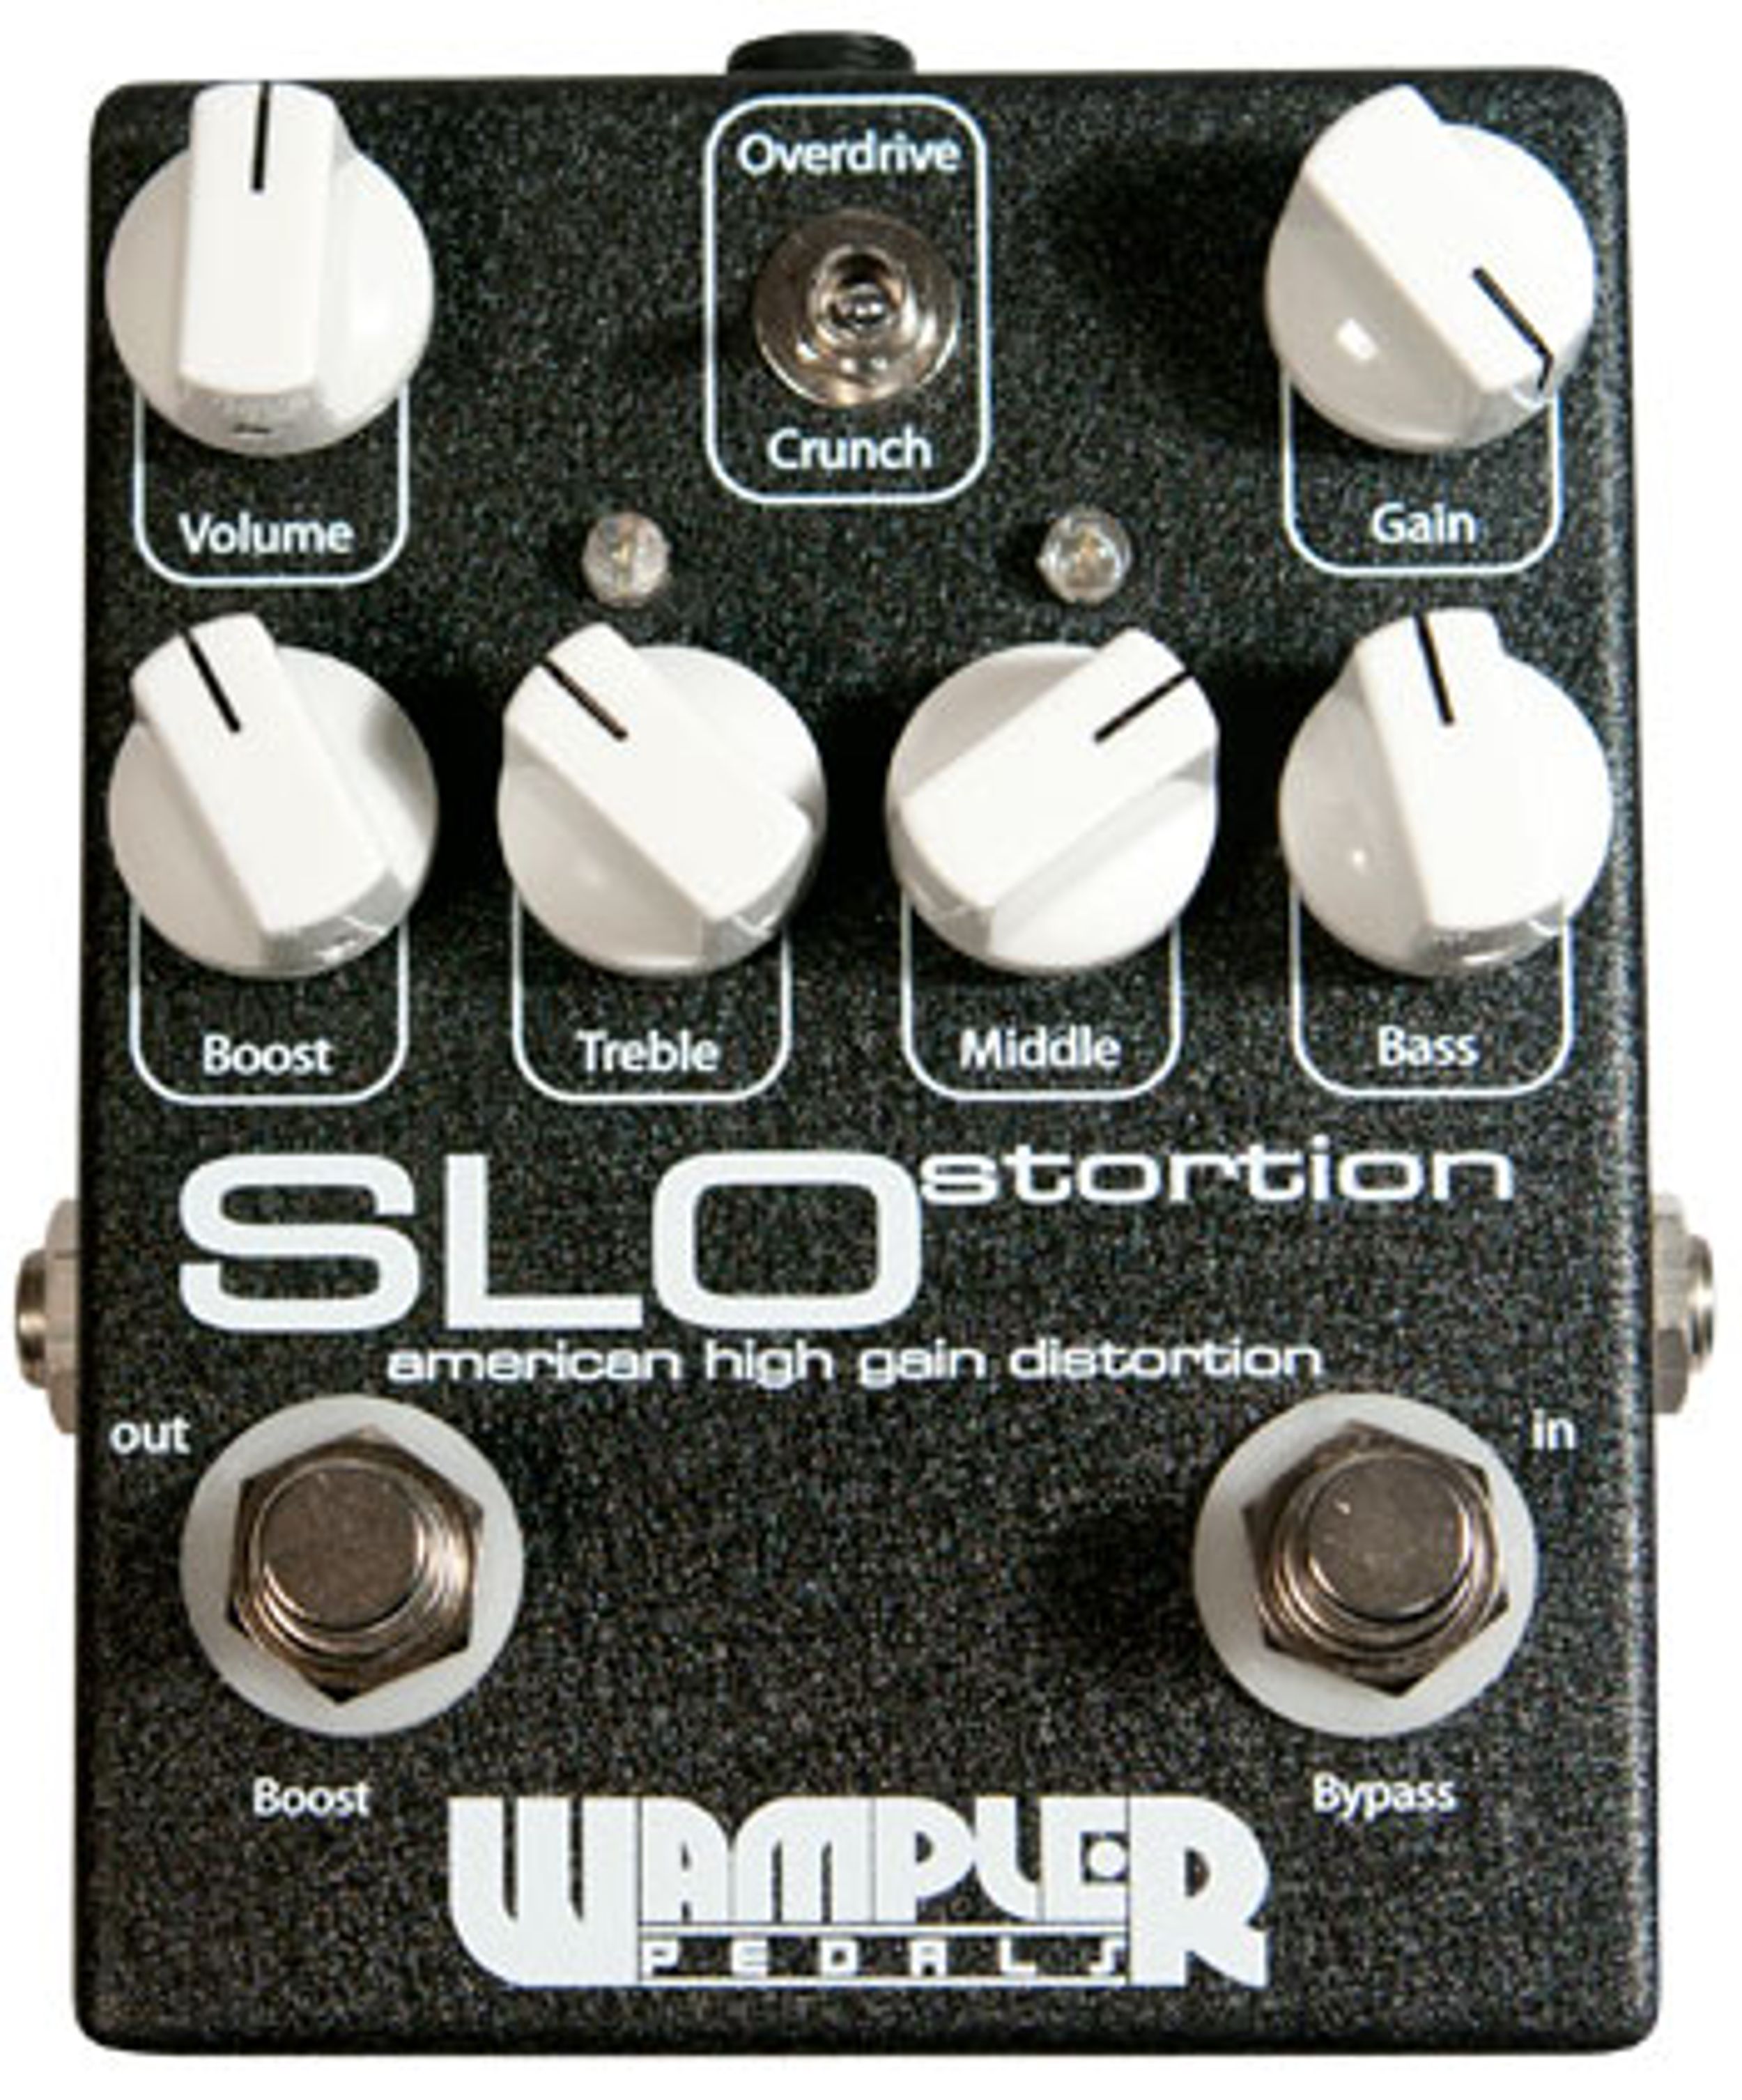 Wampler Pedals SLOstortion Pedal Review